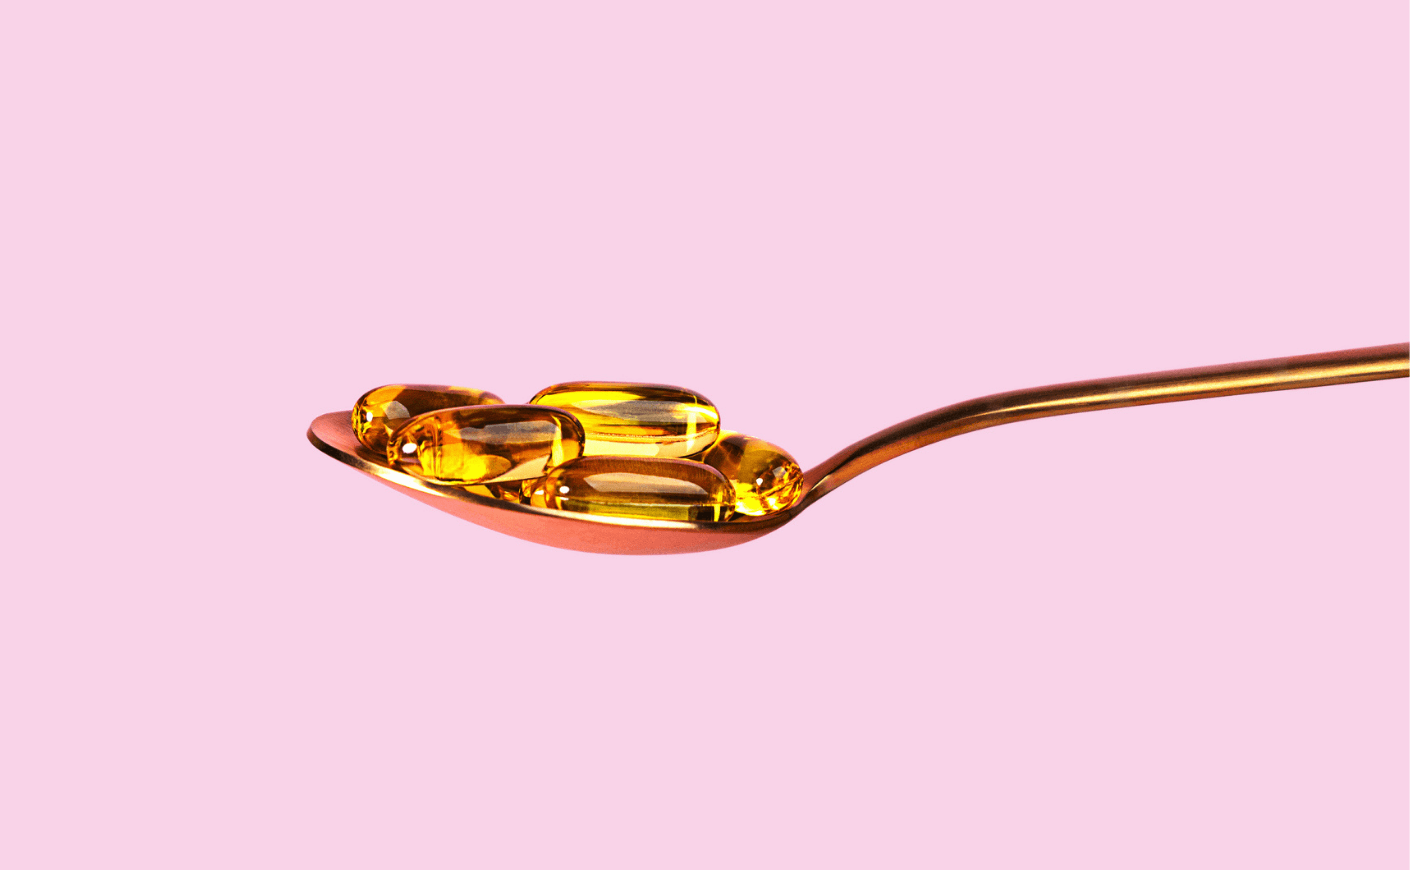 picture of a spoon with vitamin D capsules against pink background